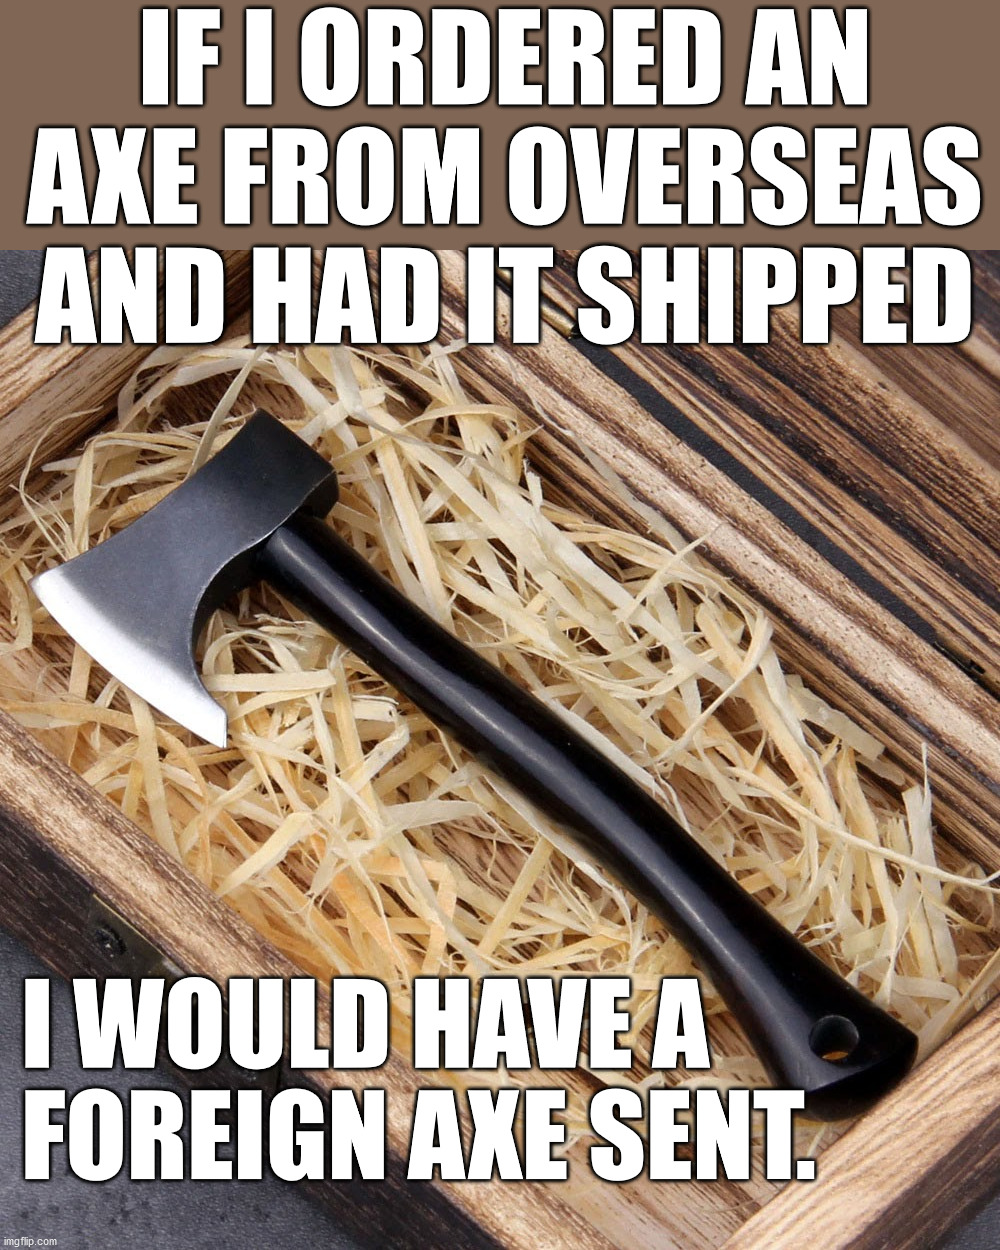 IF I ORDERED AN AXE FROM OVERSEAS AND HAD IT SHIPPED; I WOULD HAVE A 
FOREIGN AXE SENT. | image tagged in eye roll | made w/ Imgflip meme maker